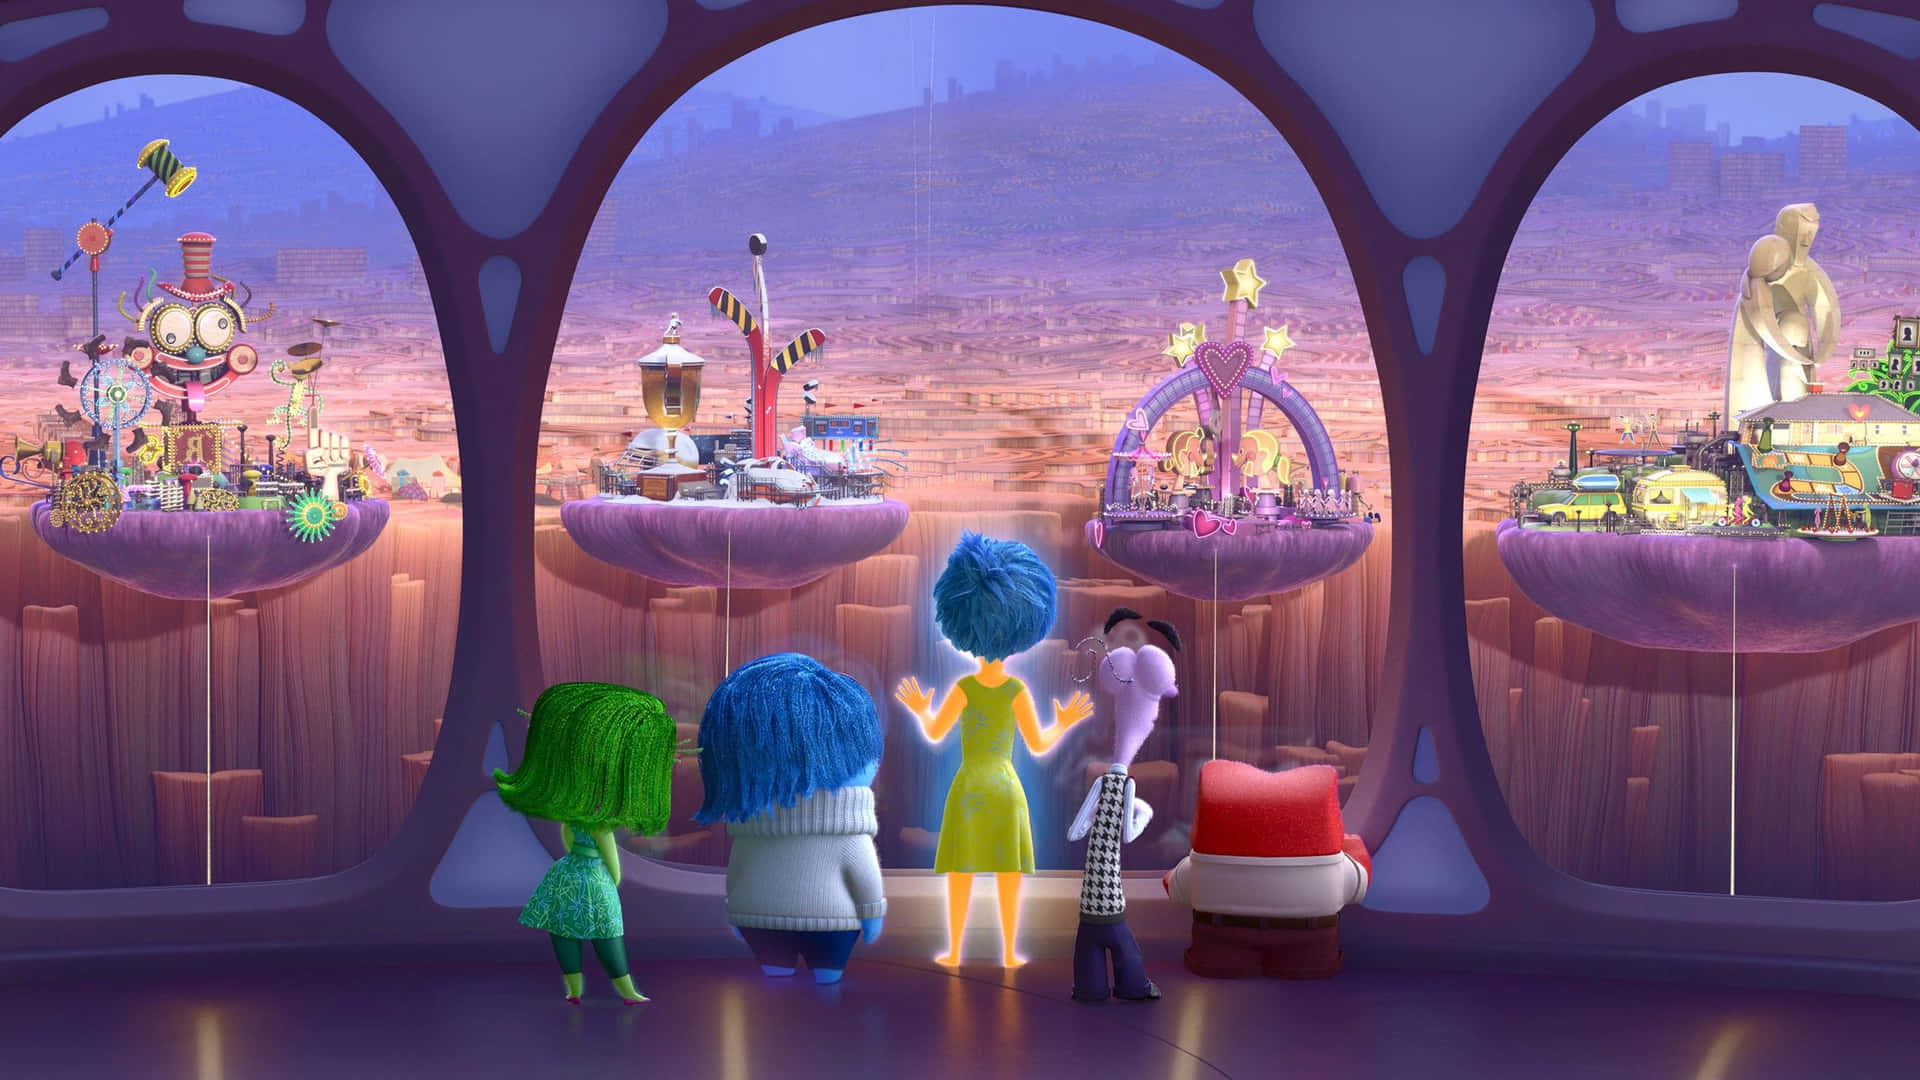 A closer look at the world of Inside Out